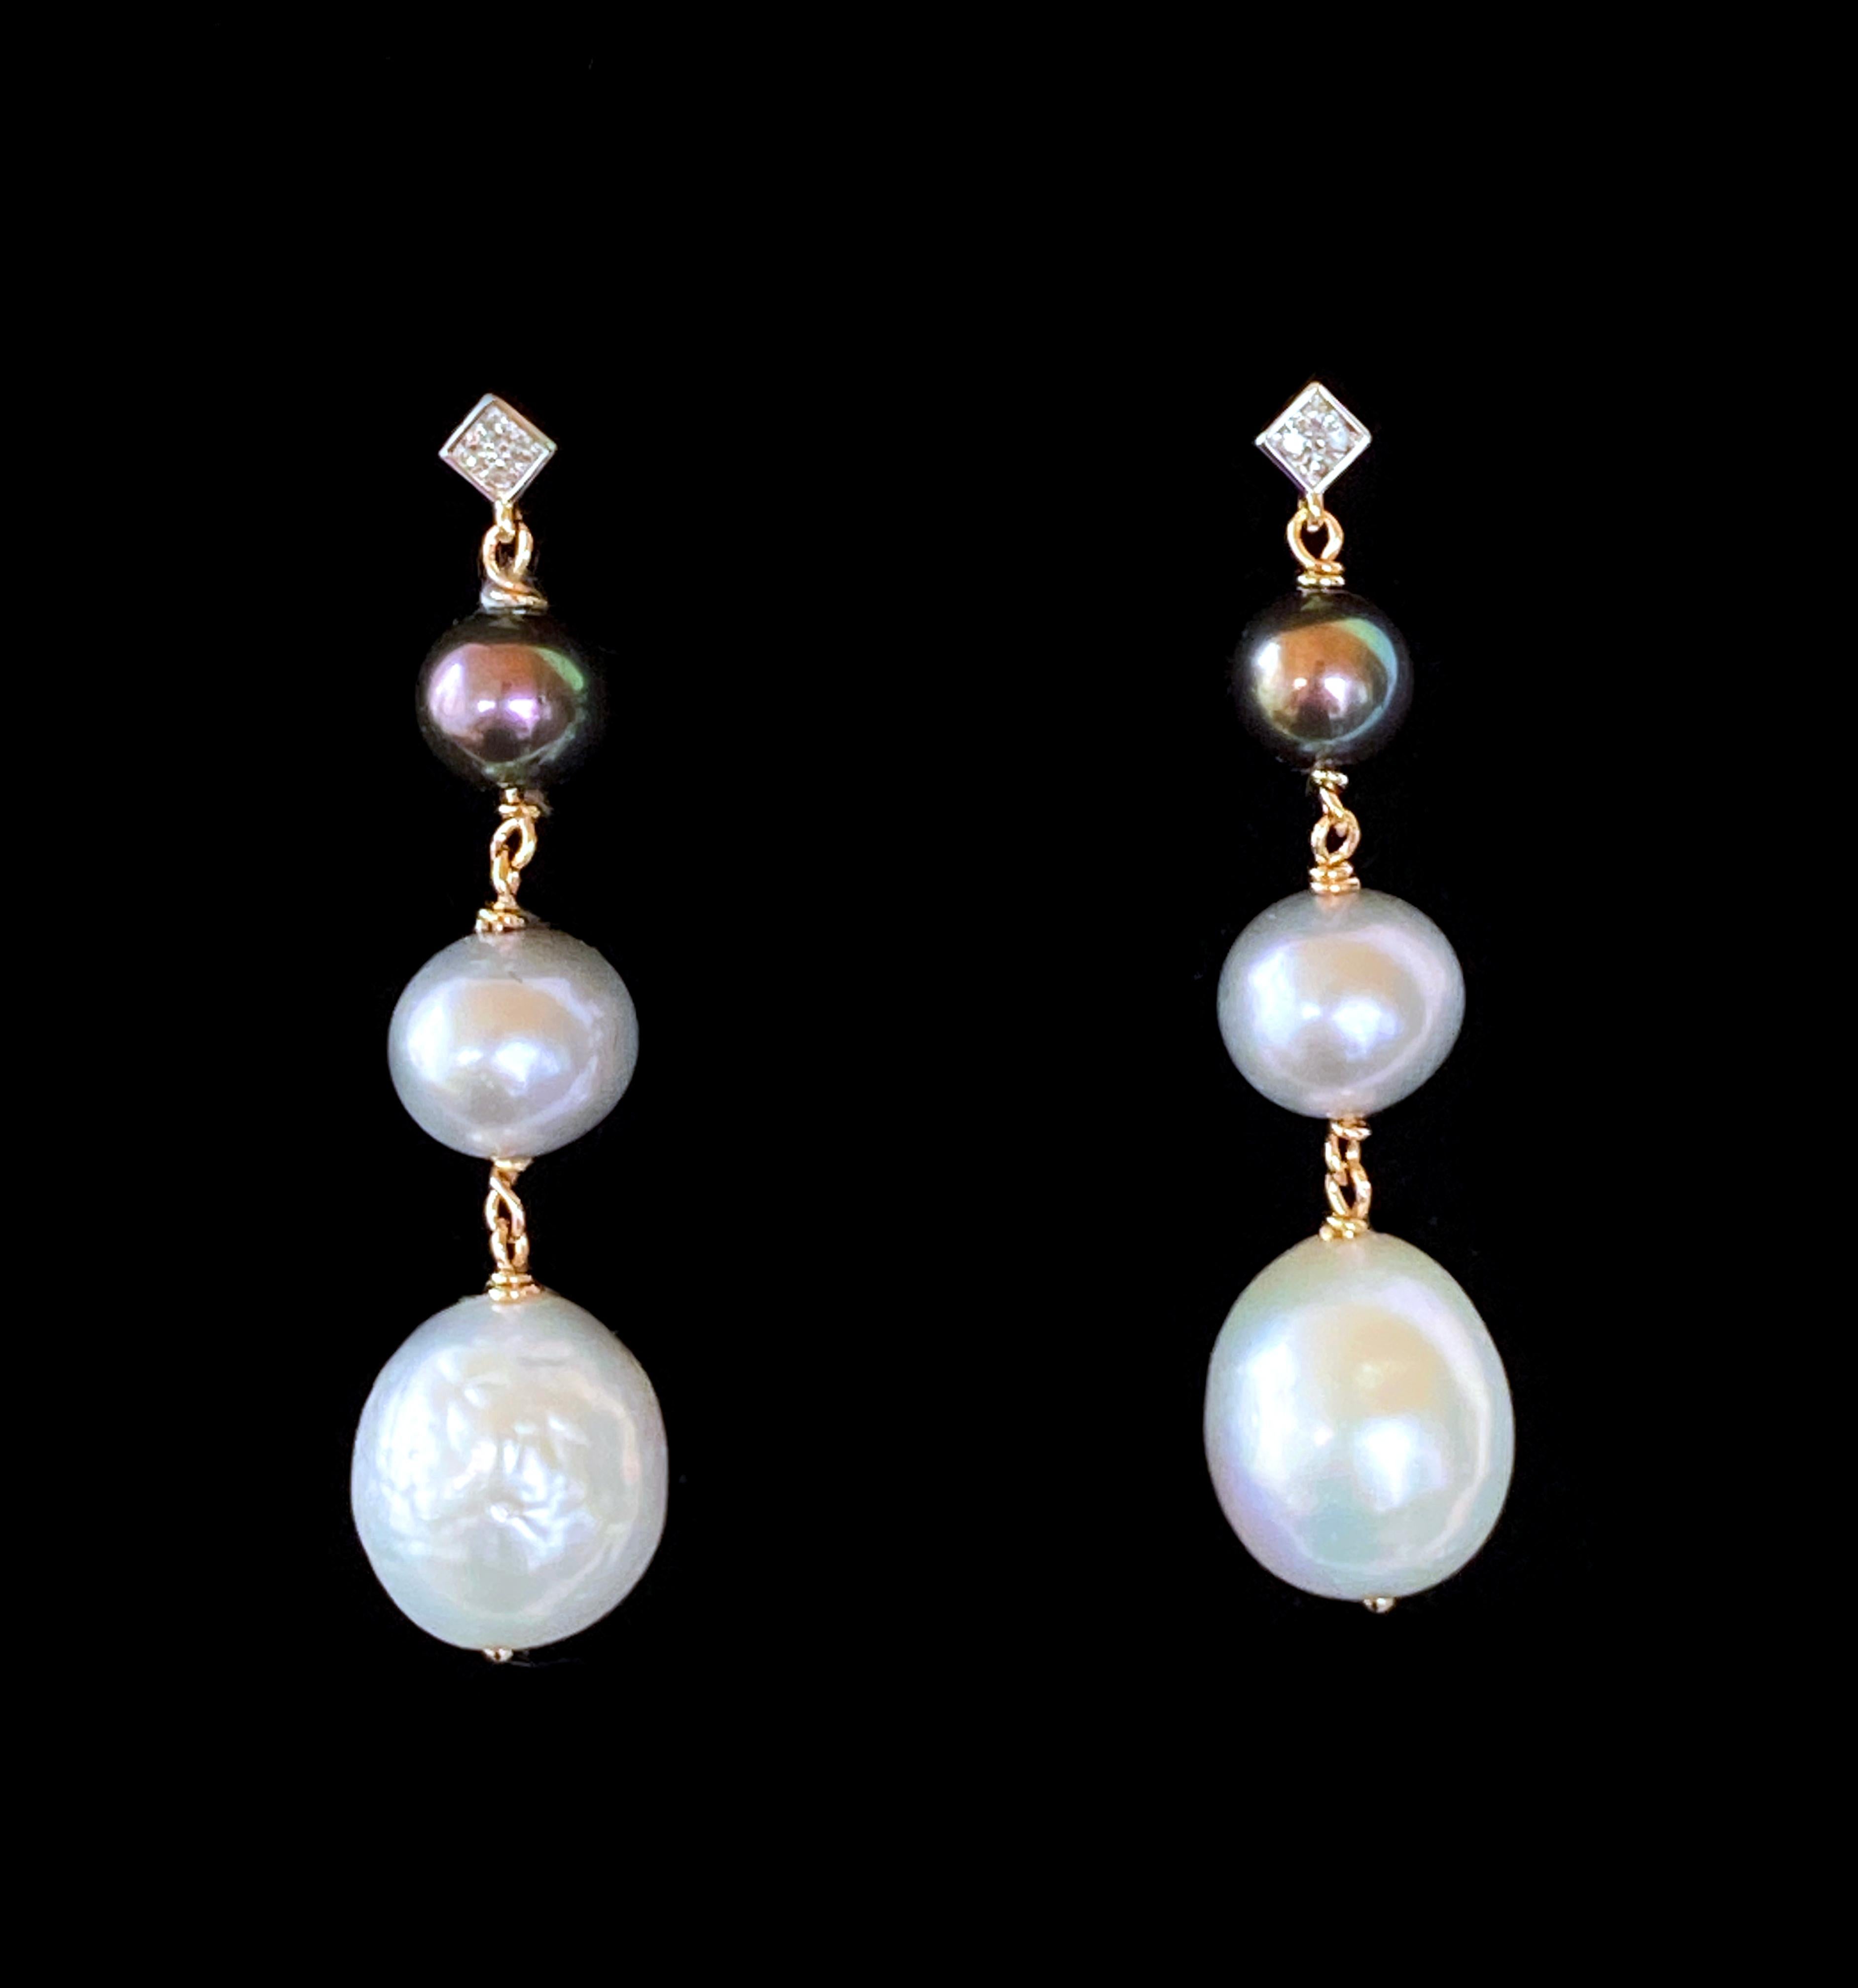 Stunning pair of earrings from Marina J. This pair features three Pearls hanging off a solid 14k Diamond encrusted Stud. The drop Pearls are both Graduated in size and hold a beautiful Black, Grey and White Ombre. Made with all 14k Yellow Gold